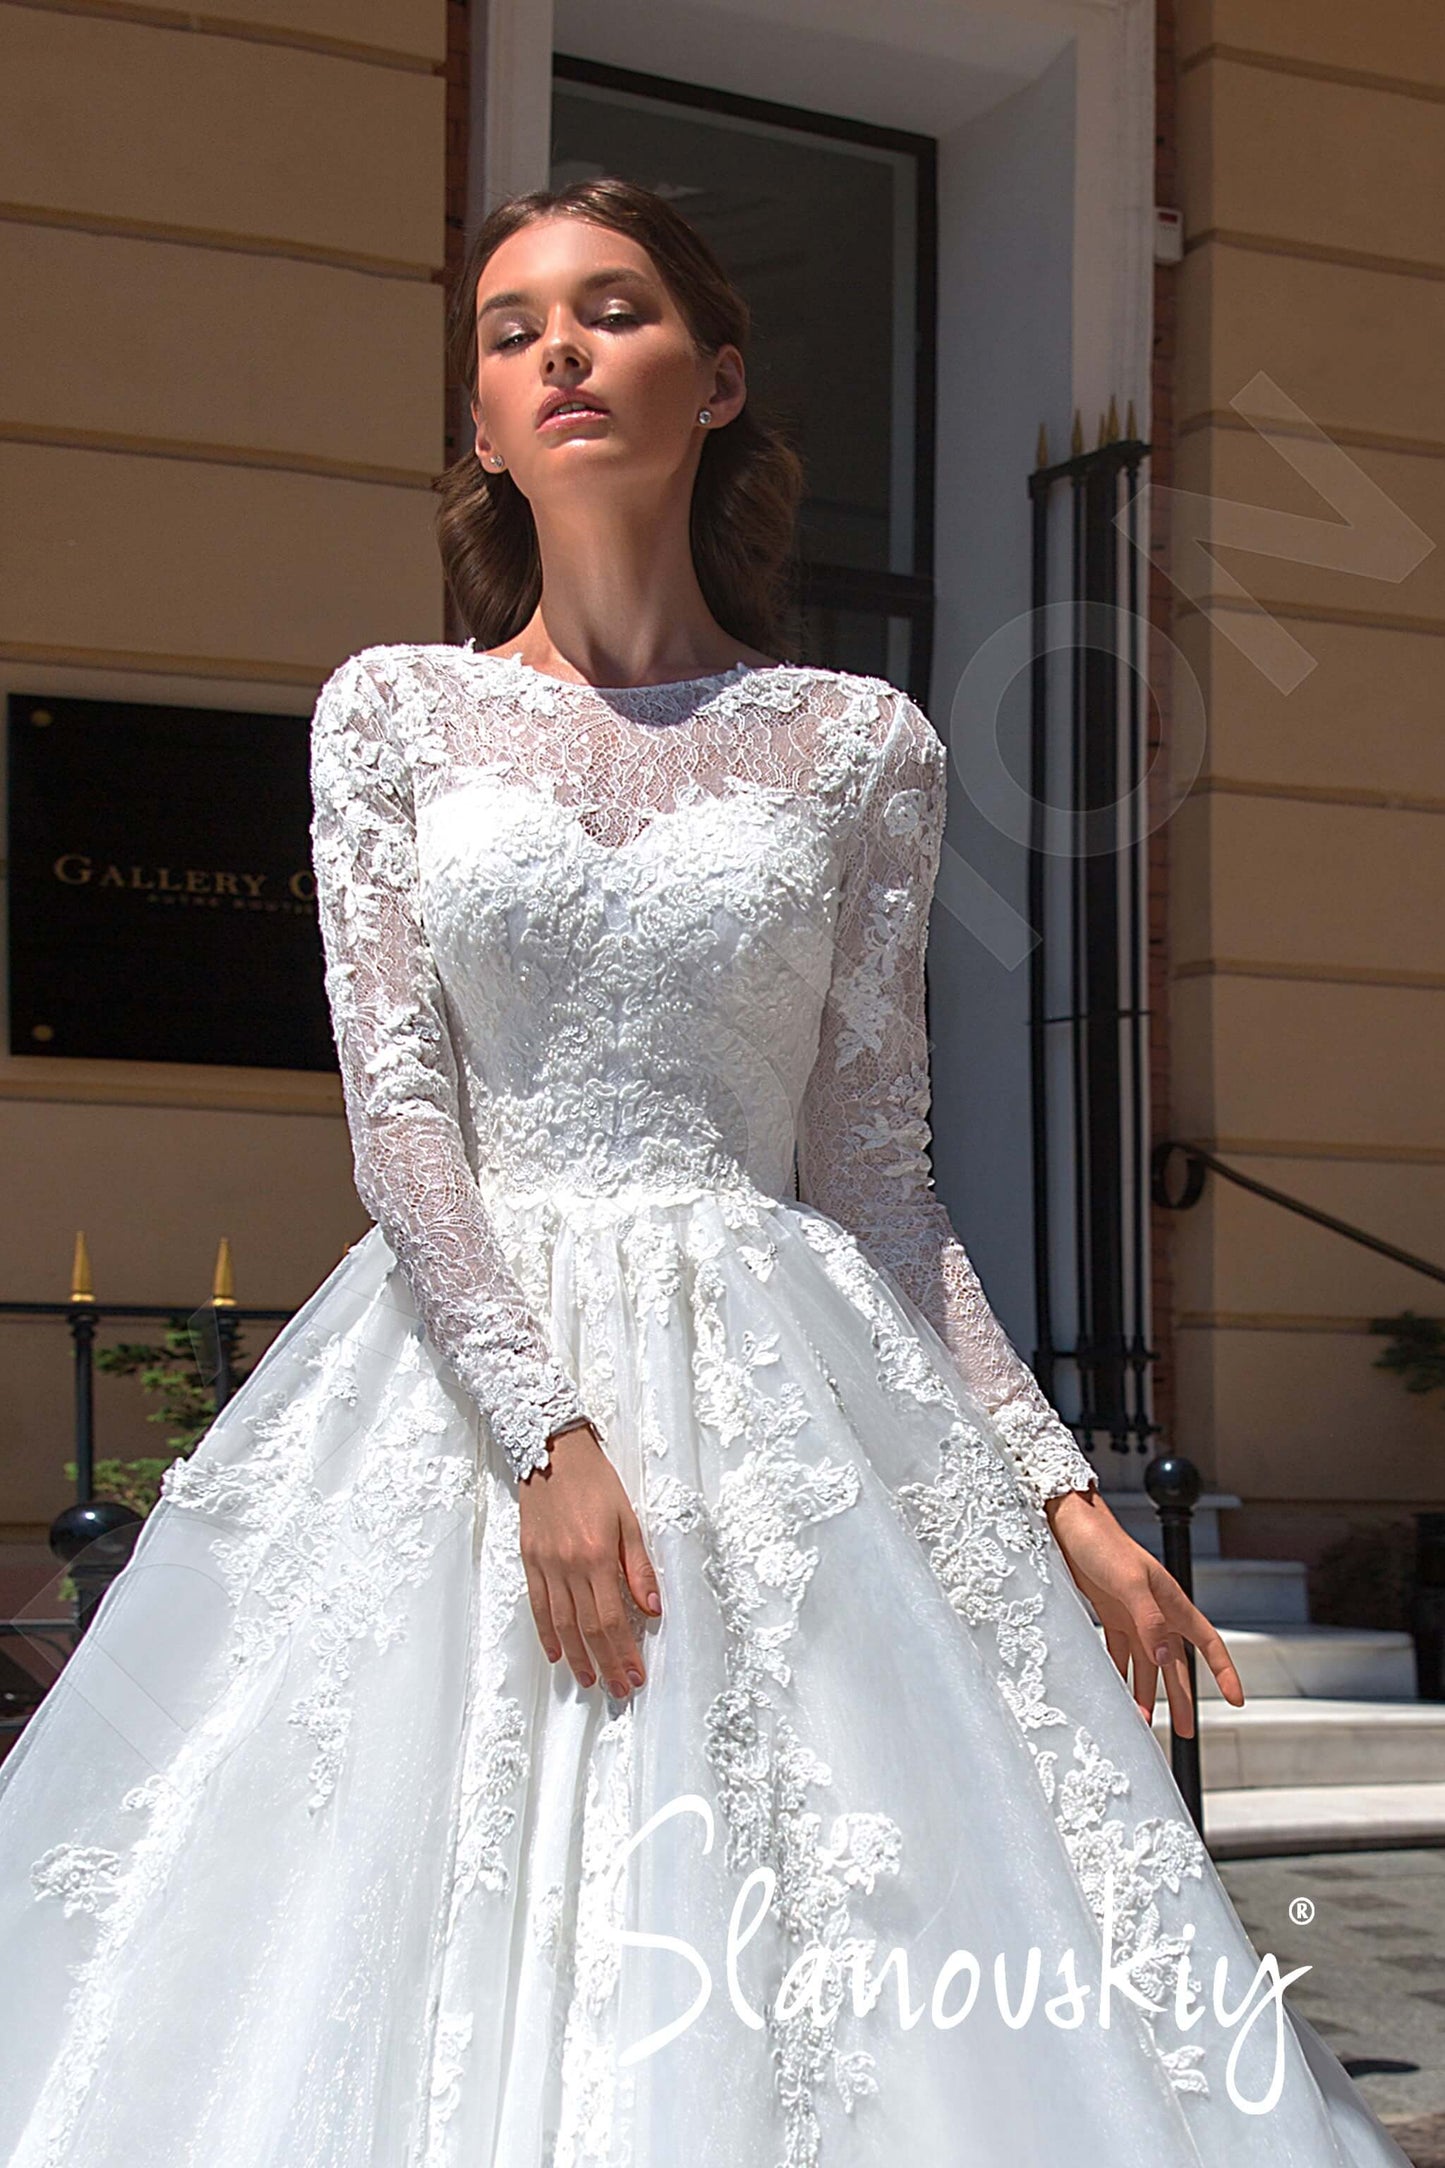 Cecilly Lace up back Princess/Ball Gown Long sleeve Wedding Dress 2